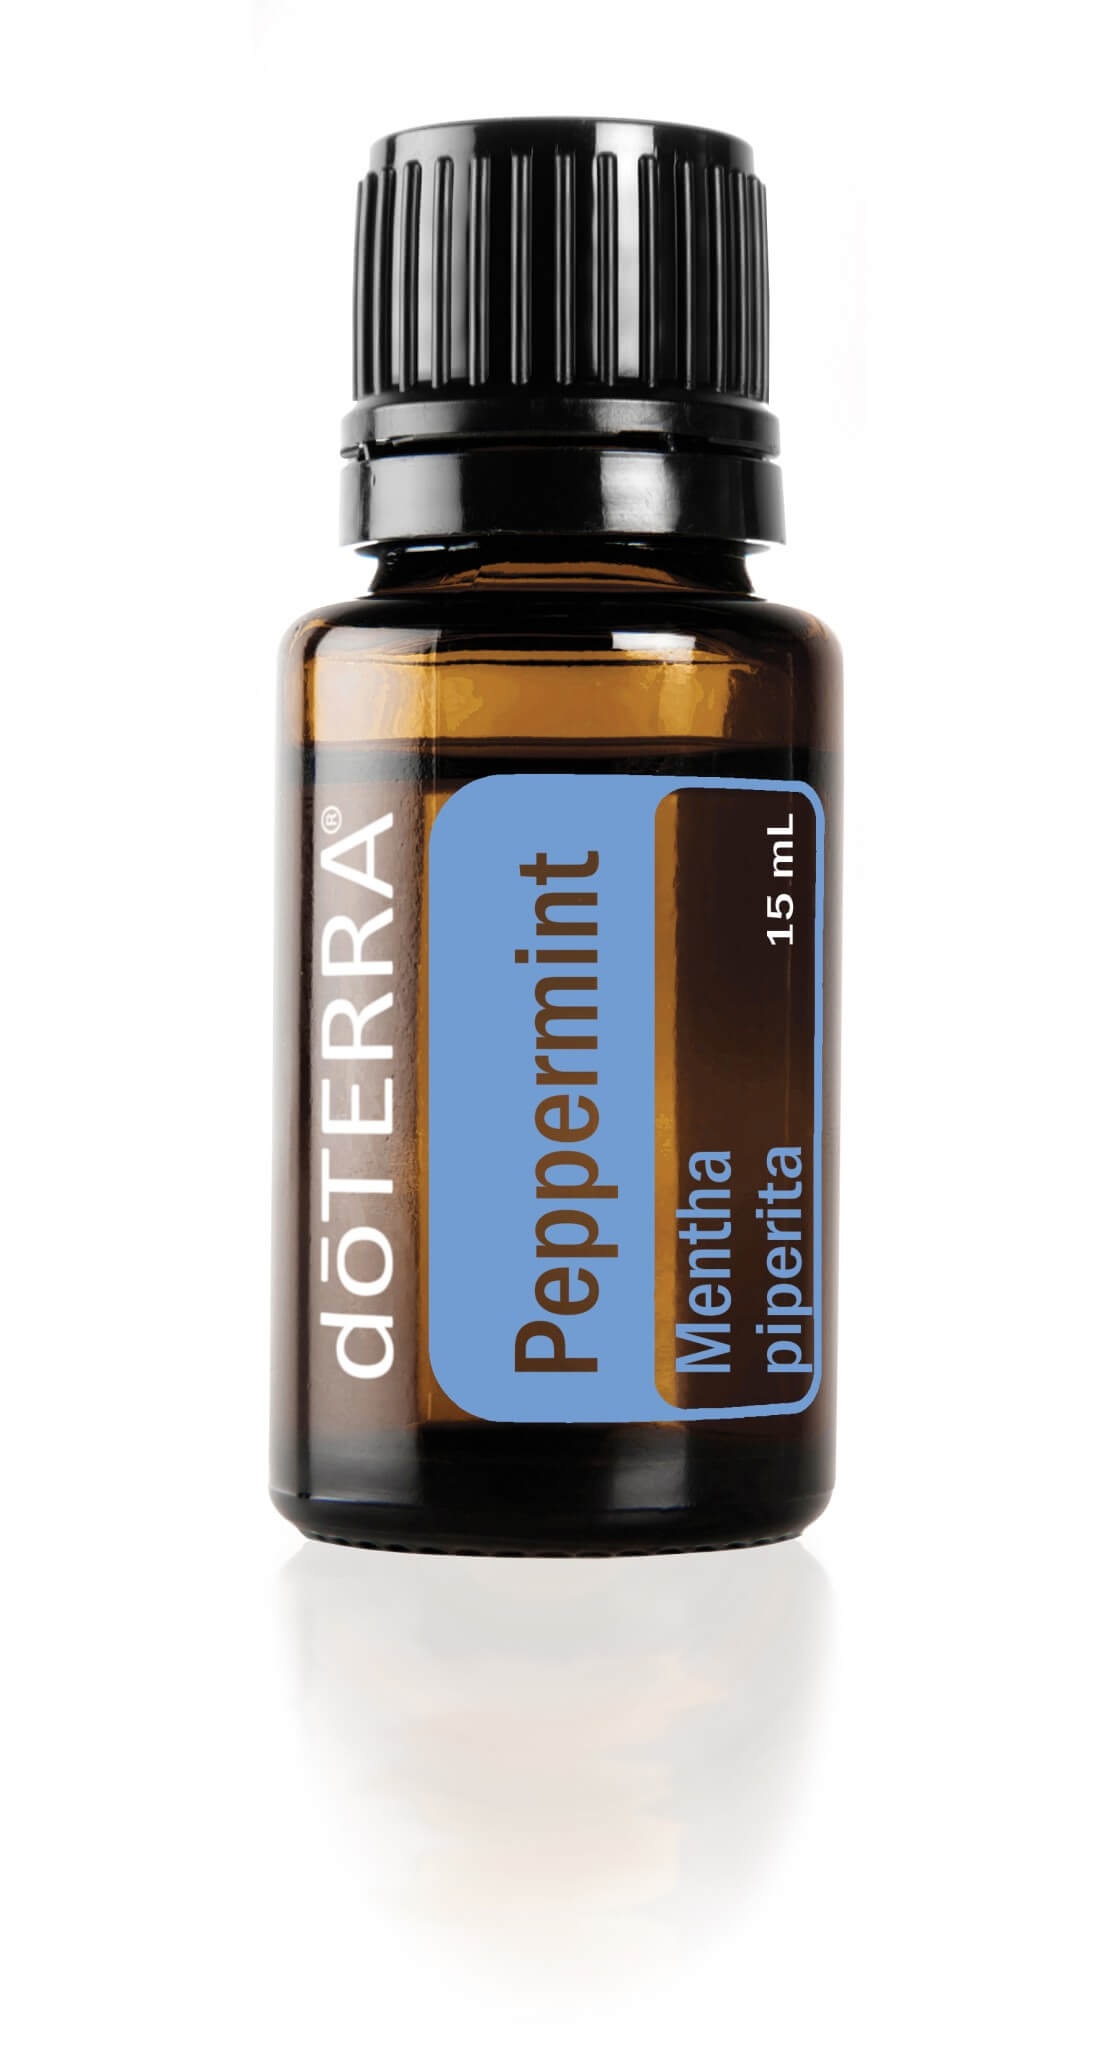 Peppermint essential oil to help quit smoking